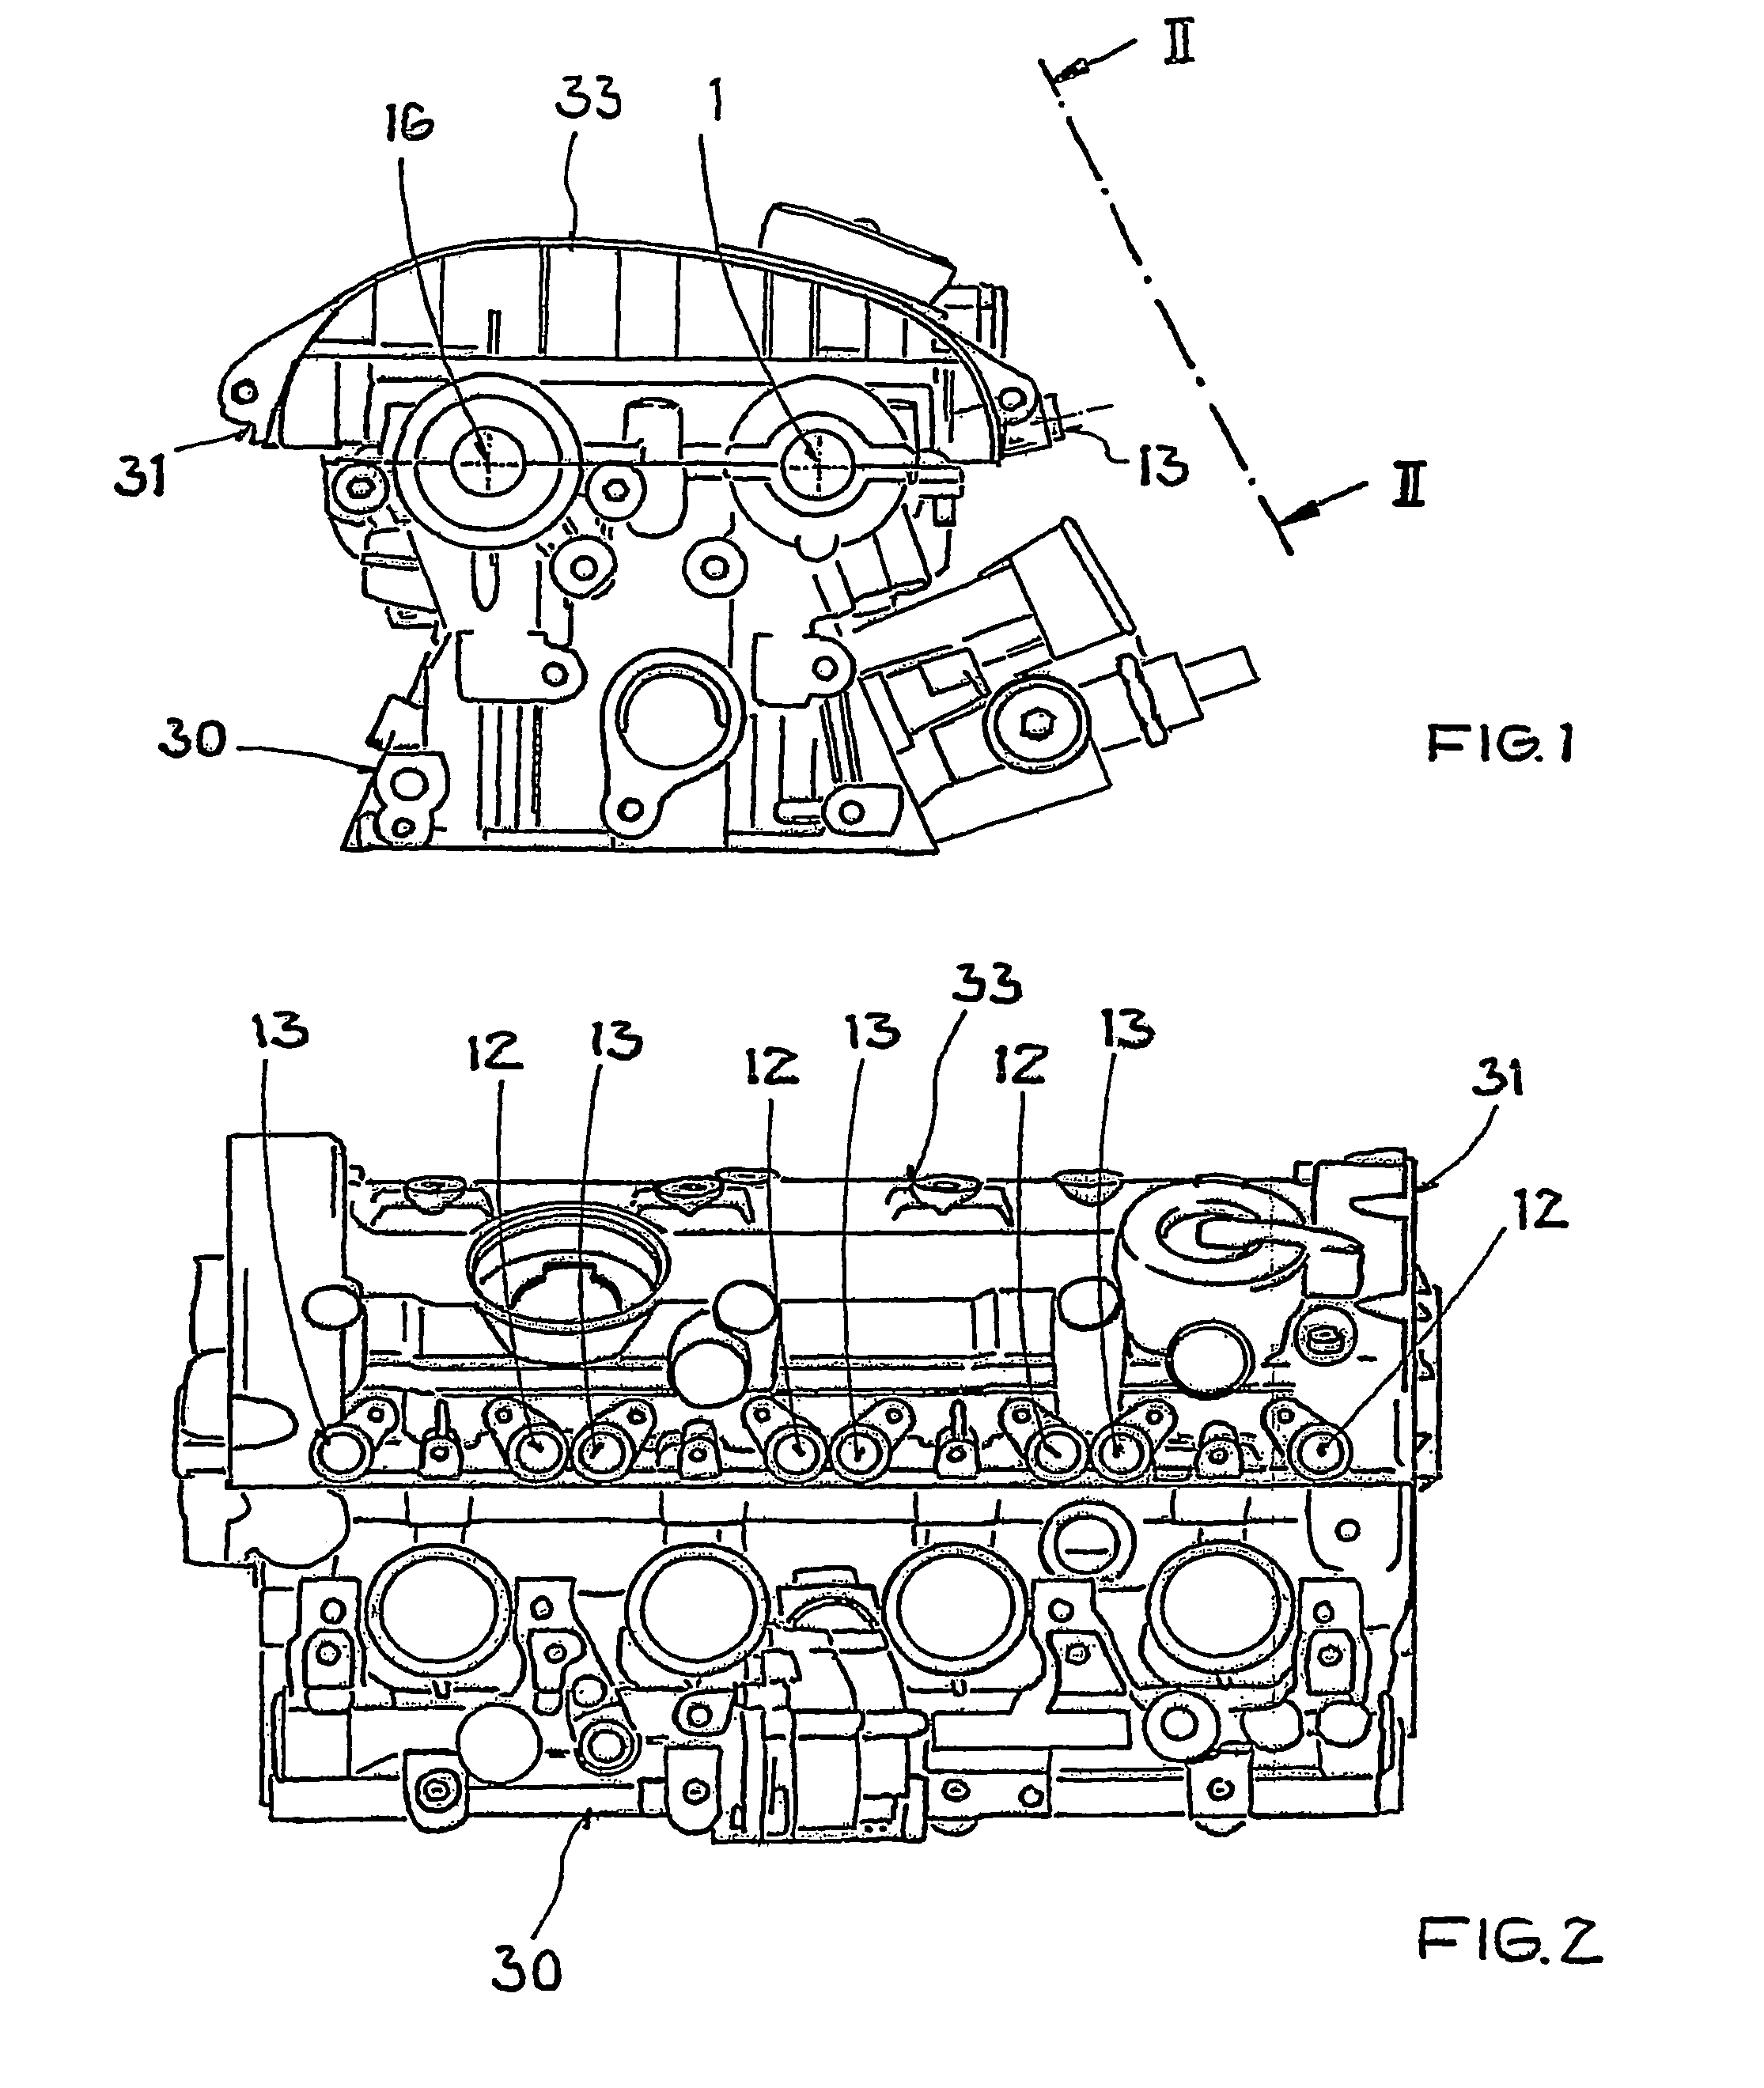 Valve drive of an internal combustion engine comprising a cylinder head